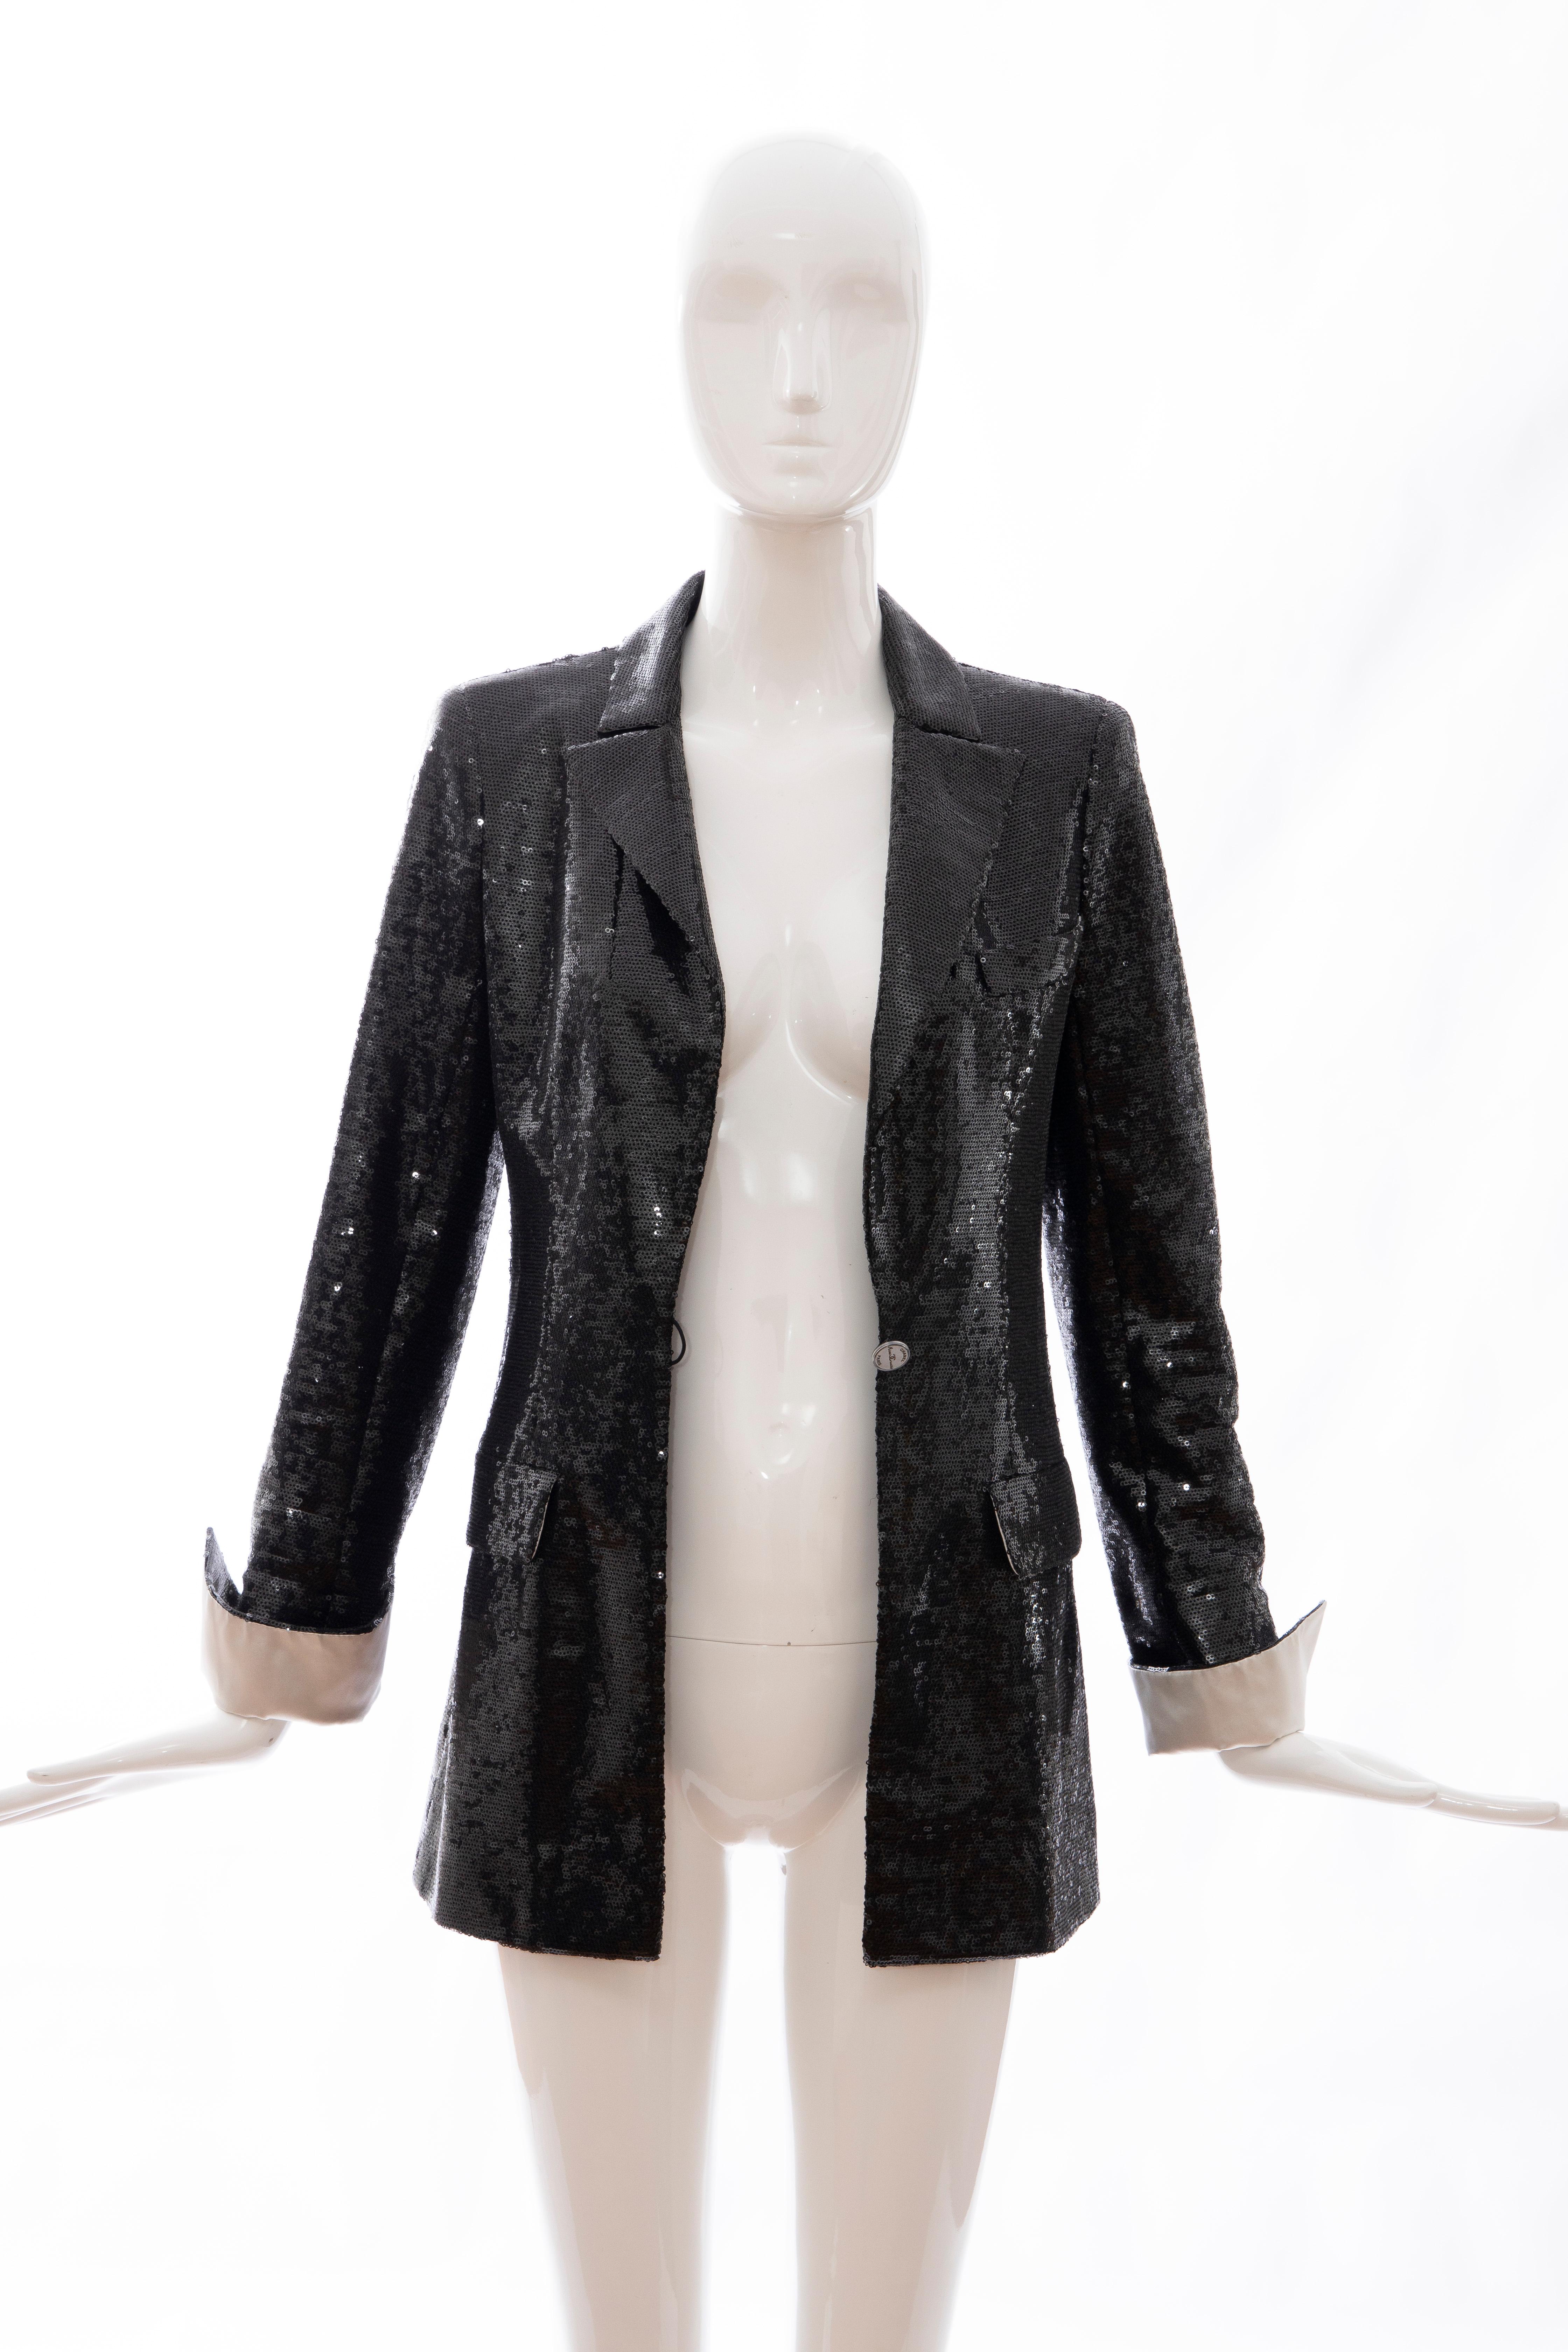 Chanel Black Embroidered Sequin Evening Jacket Ivory Silk Cuffs, Cruise 2009 For Sale 8